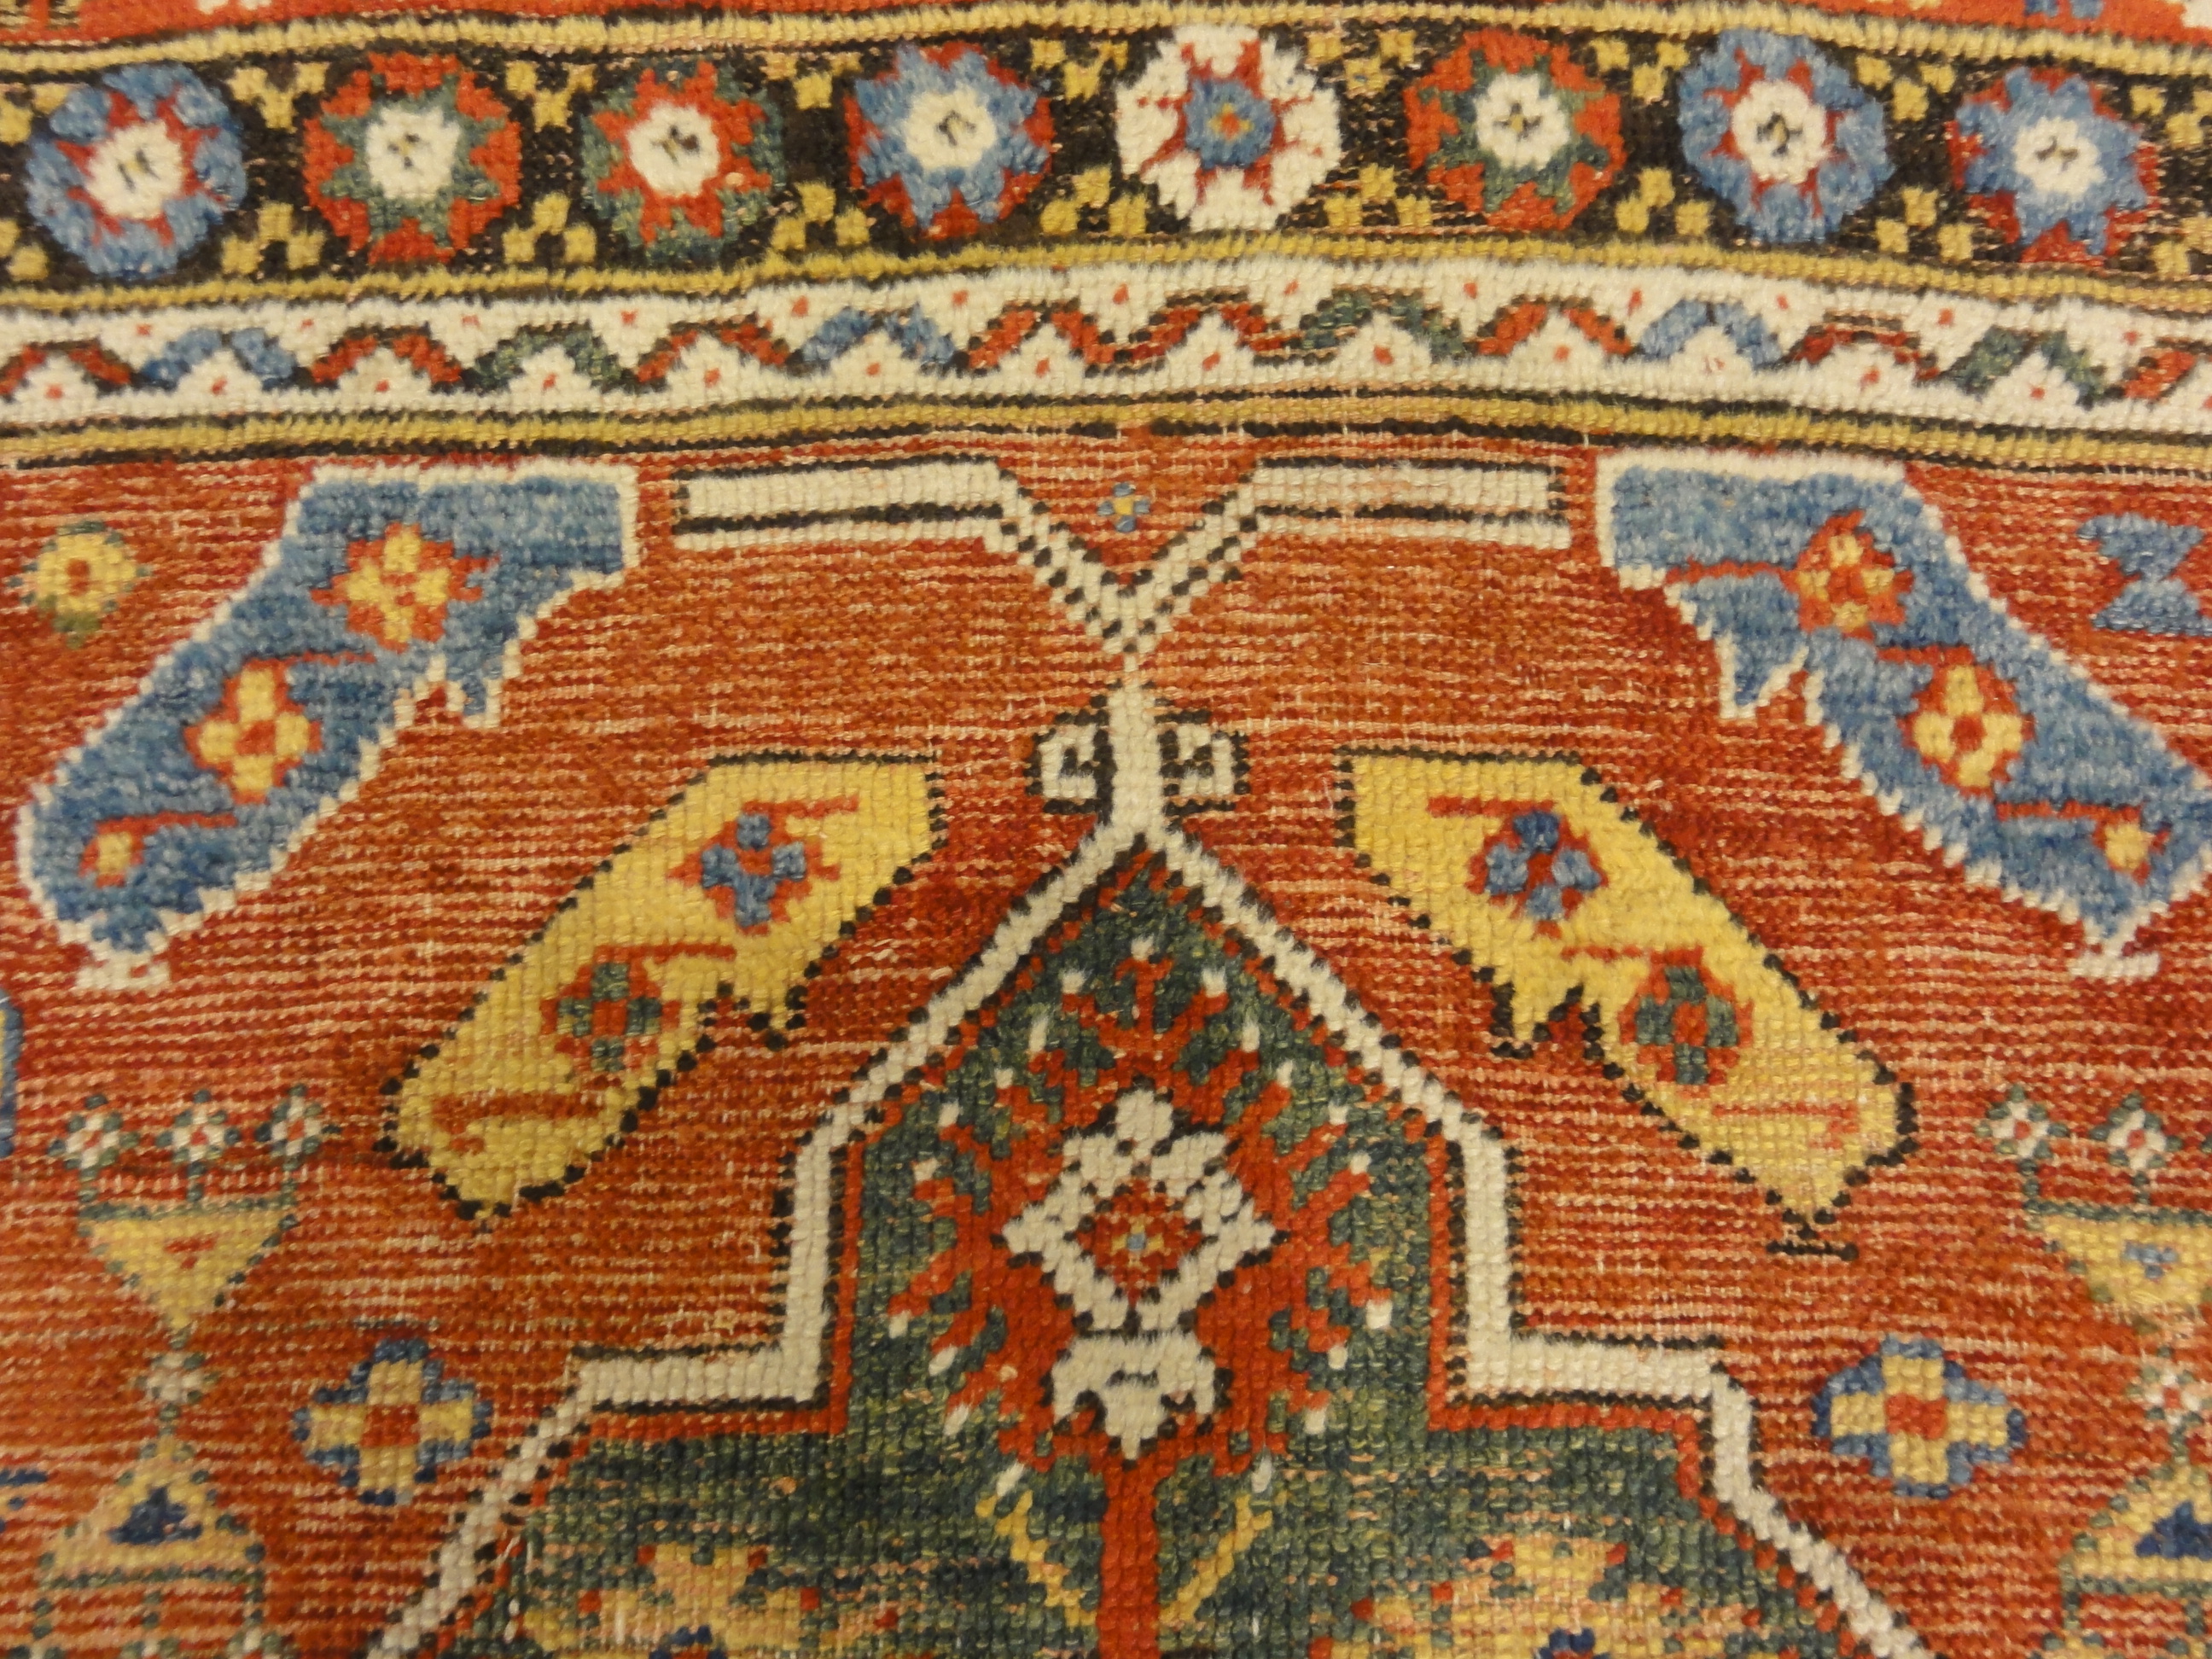 Antique Turkish Bergama Rug. A piece of genuine woven carpet art sold by the Santa Barbara Design Center and Rugs and More.